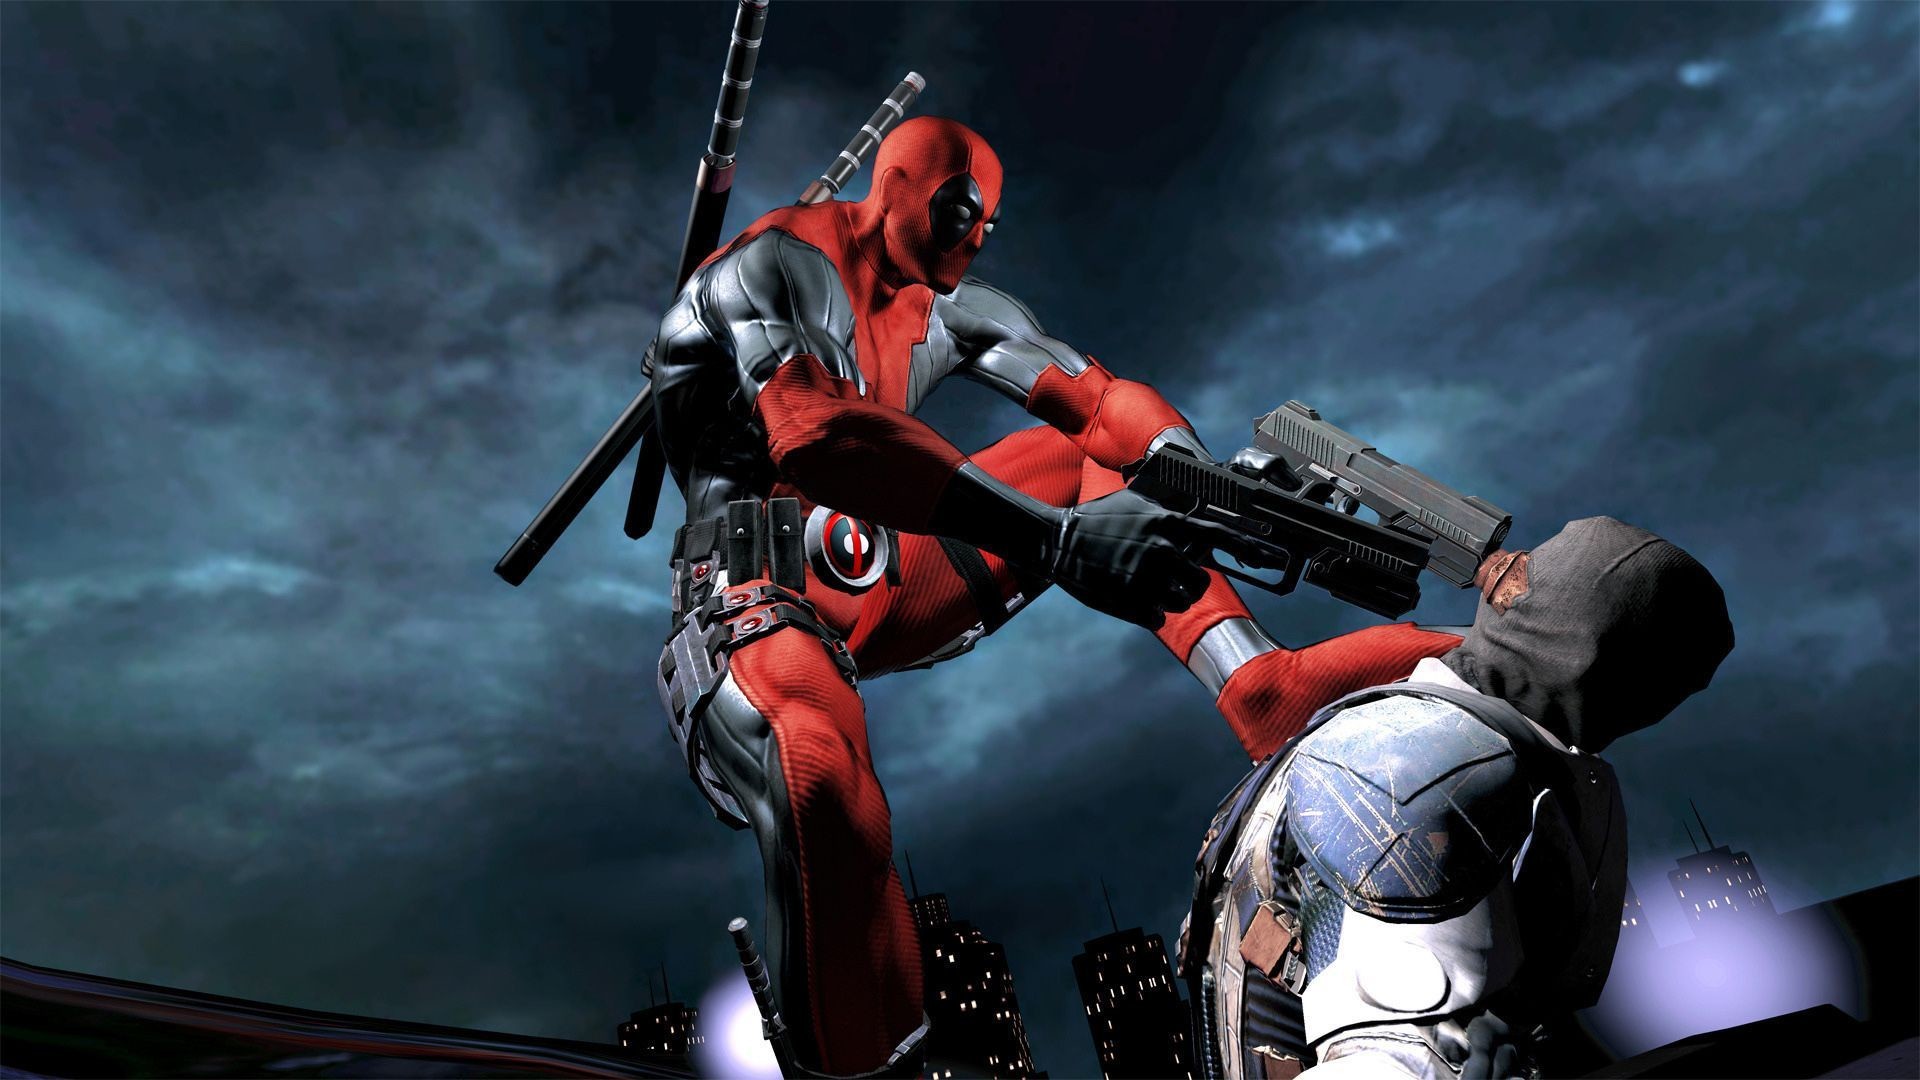 1920x1080  Deadpool Action Wallpapers | HD Games Wallpapers for Mobile and  Desktop